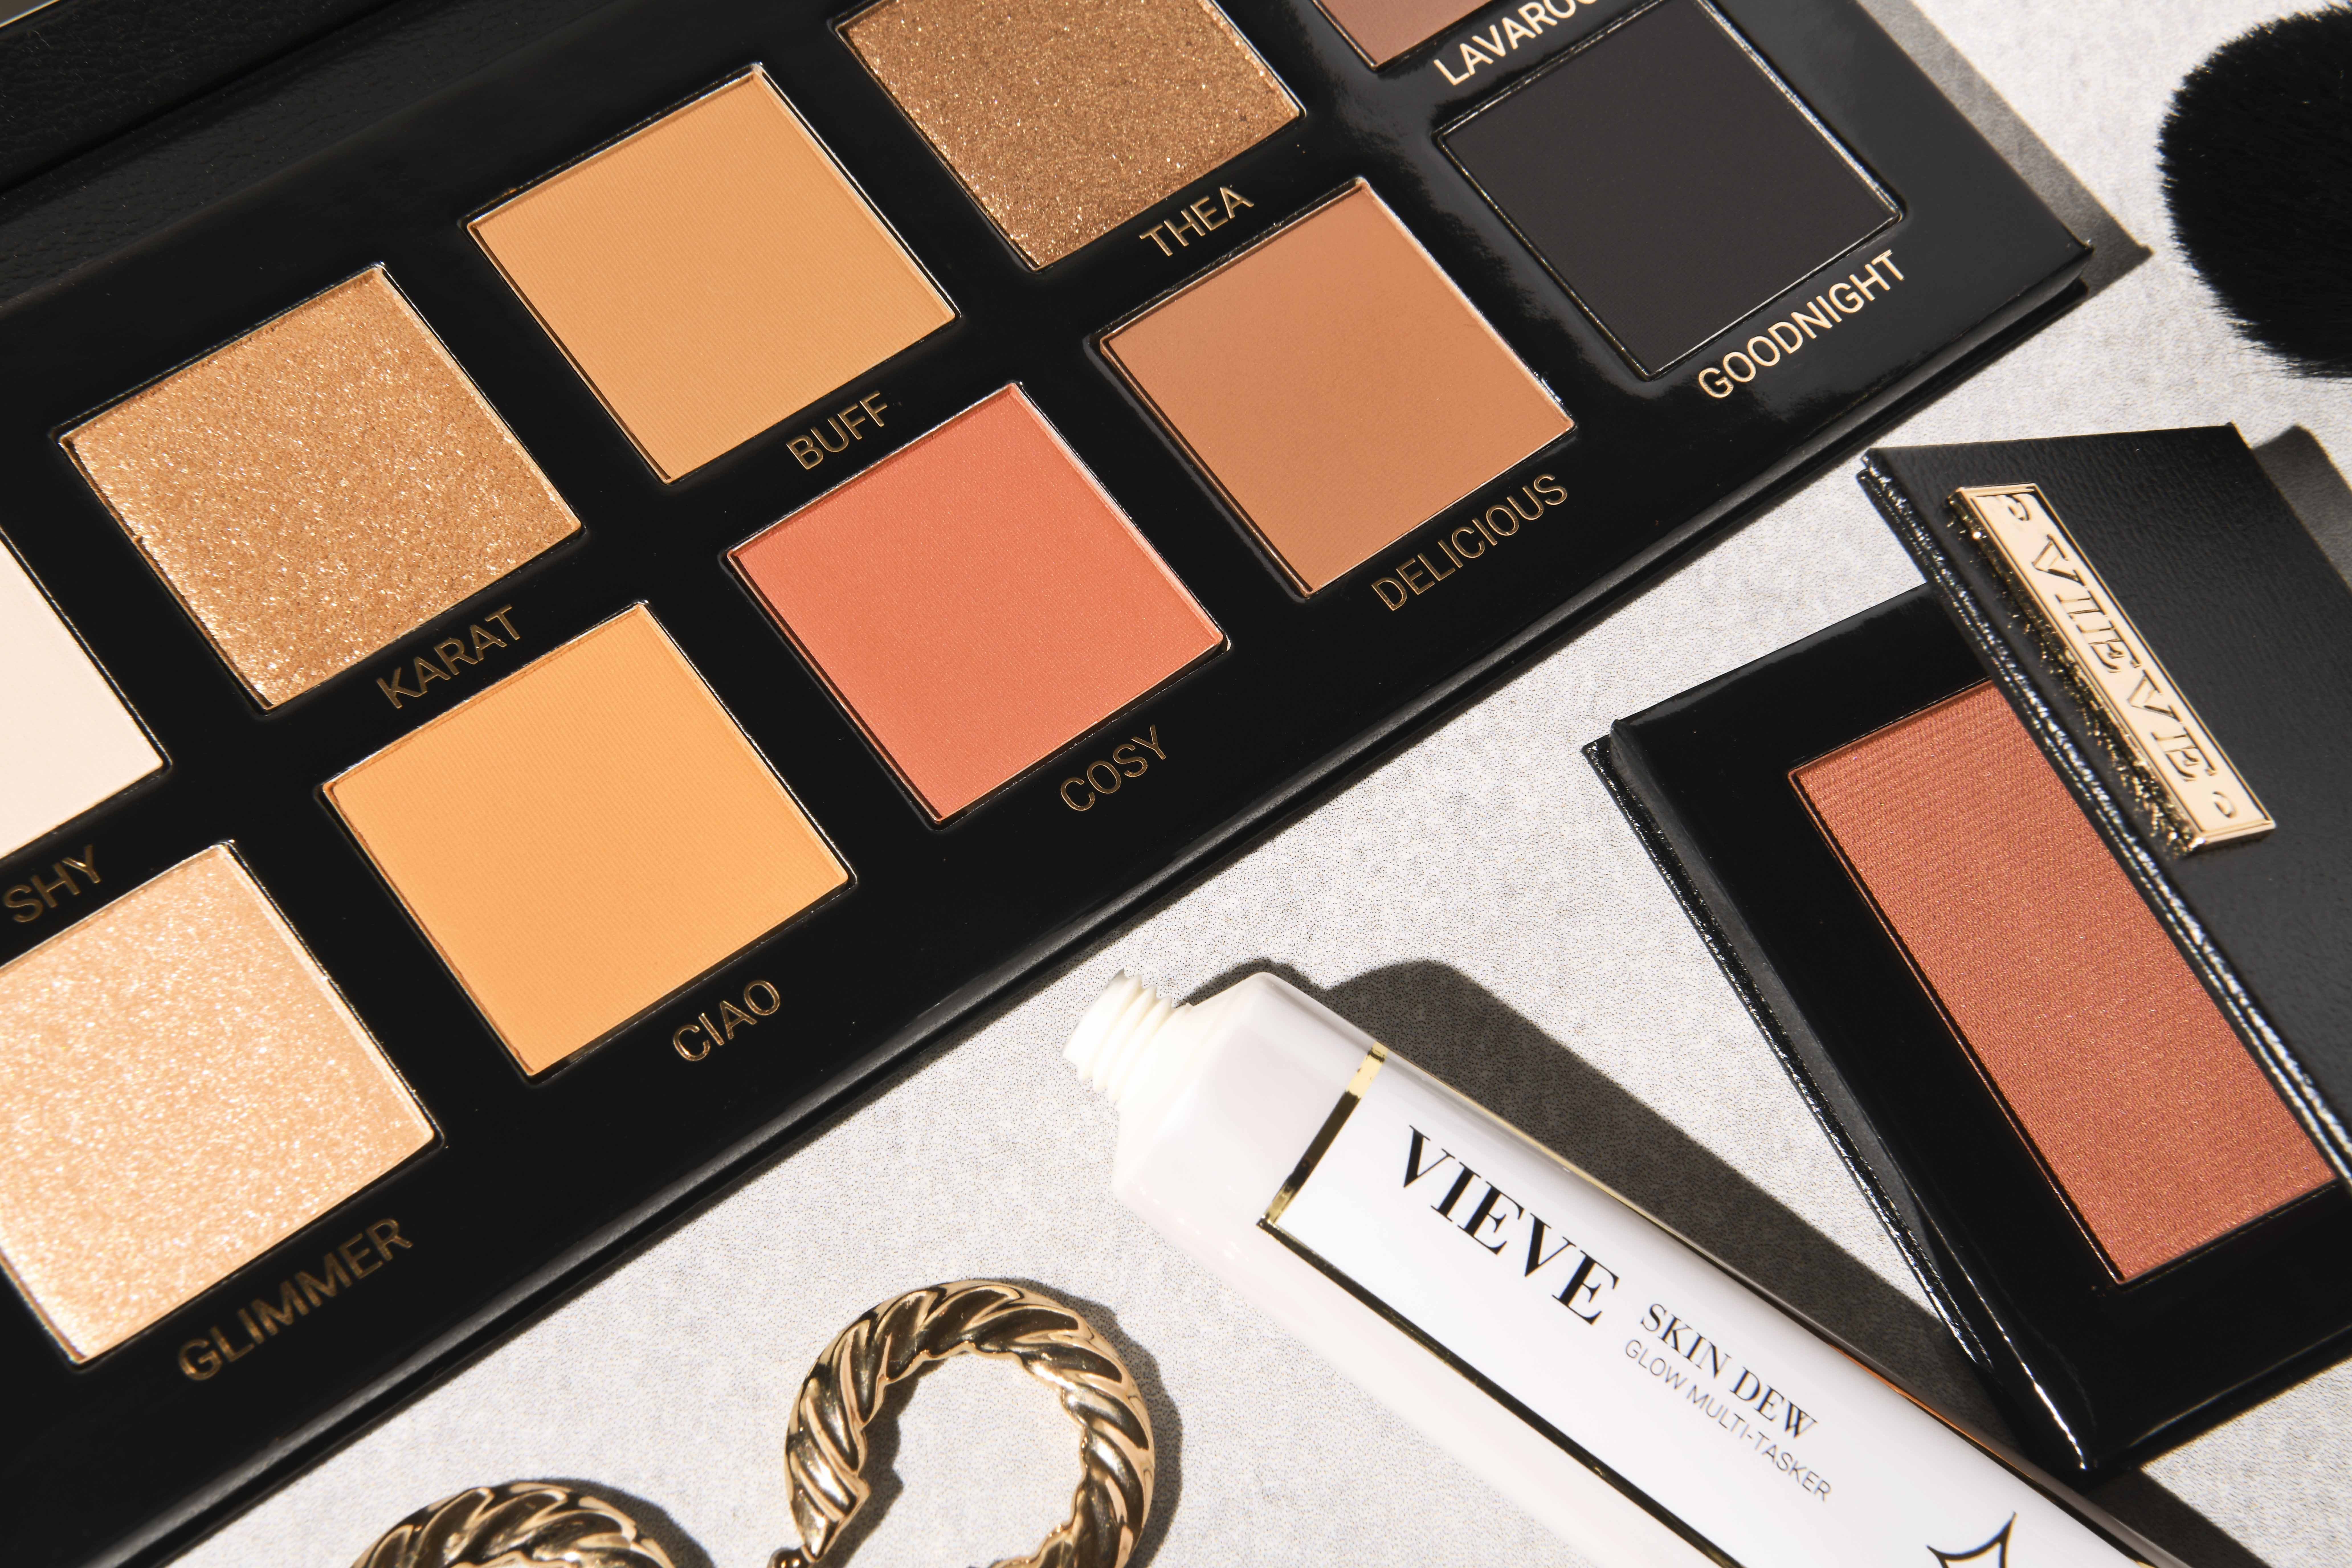 6 Must-Have Makeup Buys From Jamie Genevieve's VIEVE line